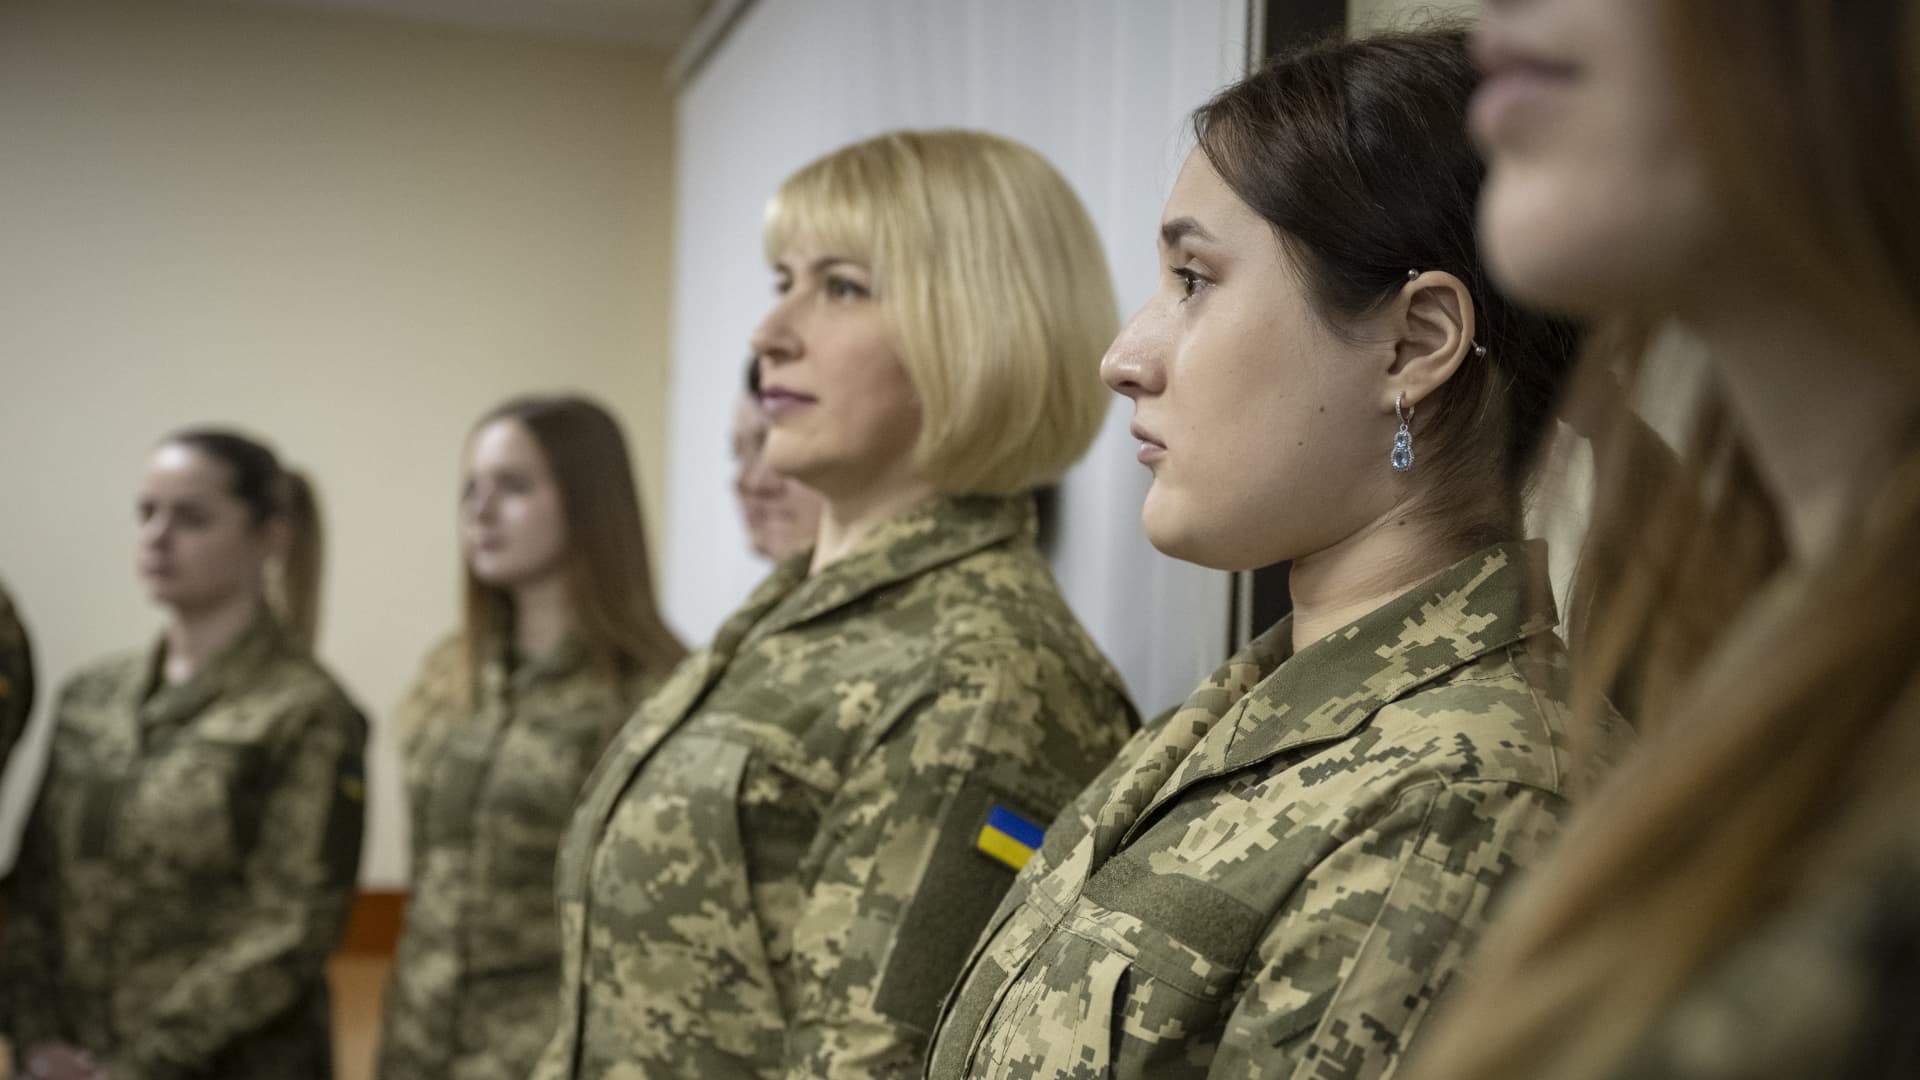 Women in military uniforms pose for a photo during the presentation on February 1, 2024 in Kyiv, Ukraine. The Ministry of Defense of Ukraine has held a presentation of military uniforms for women with 50,000 sets produced in Ukraine.